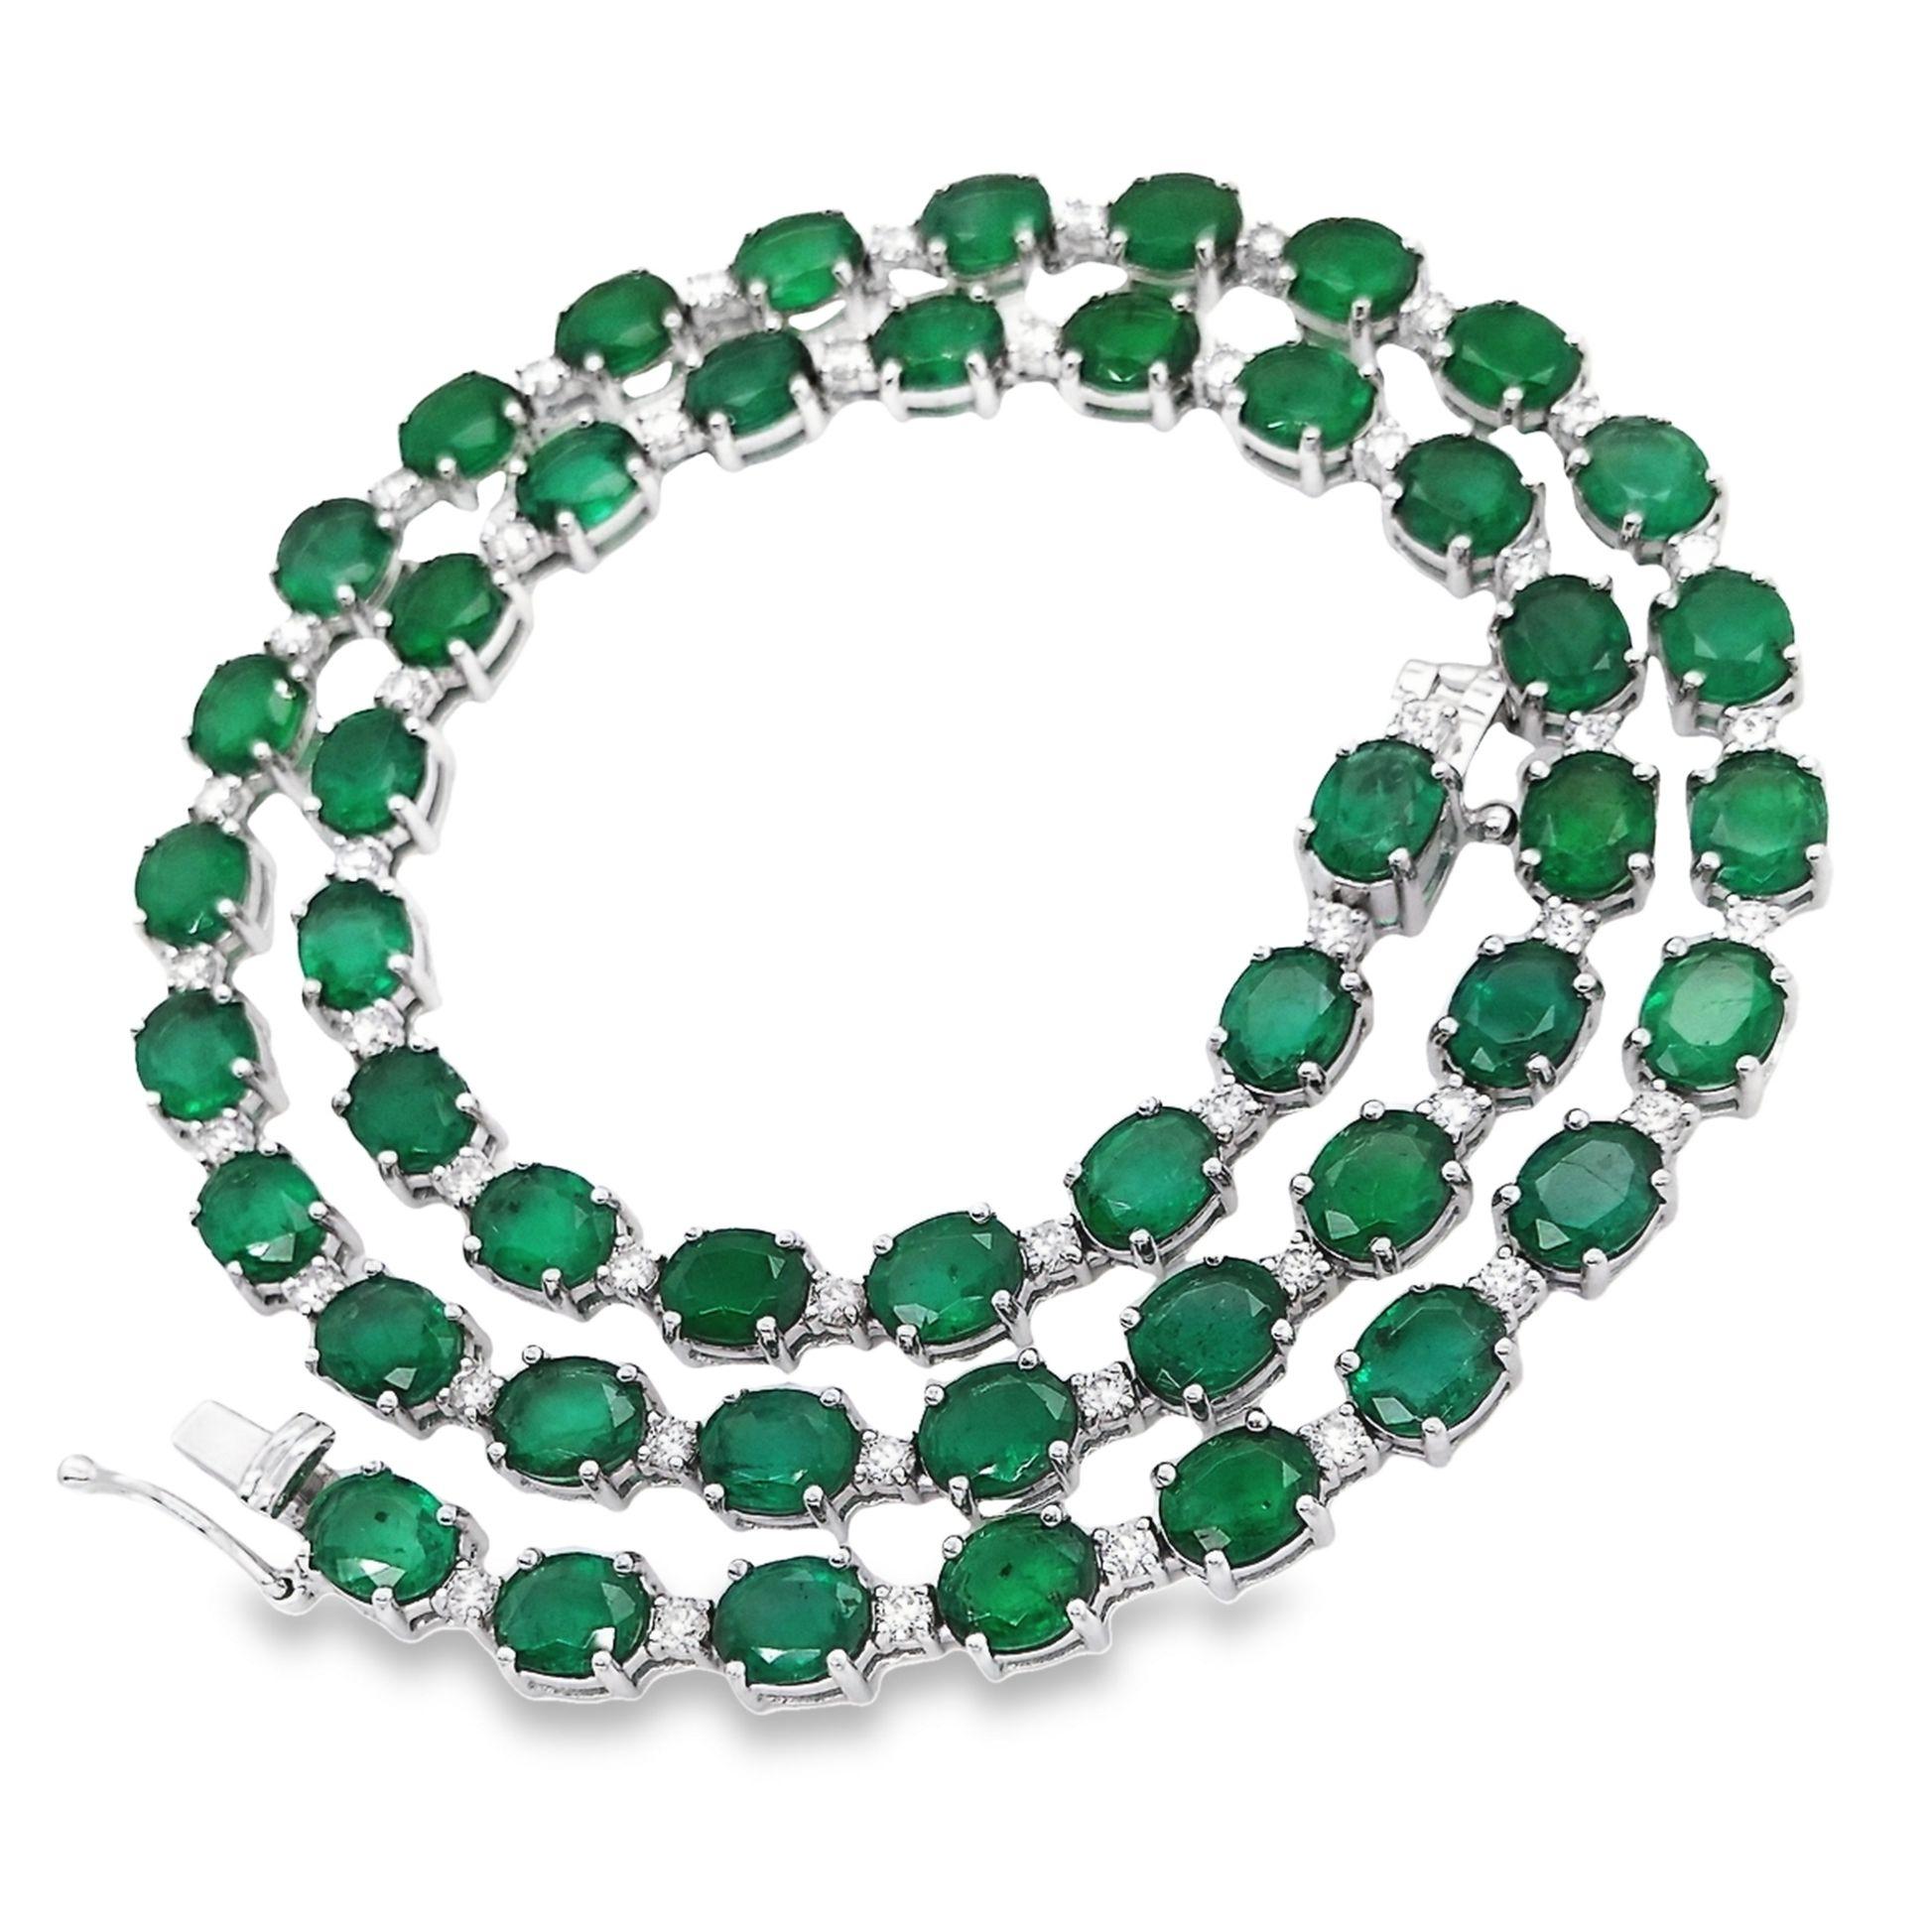 This exquisite necklace, by Top Crown Jewelry, measuring 41 cm in length, features IGI Certified 29.42ct of intense-green natural Zambian Emeralds complemented by 1.77ct of sparkling natural Diamonds. Elegantly set in 18K white gold, this luxurious